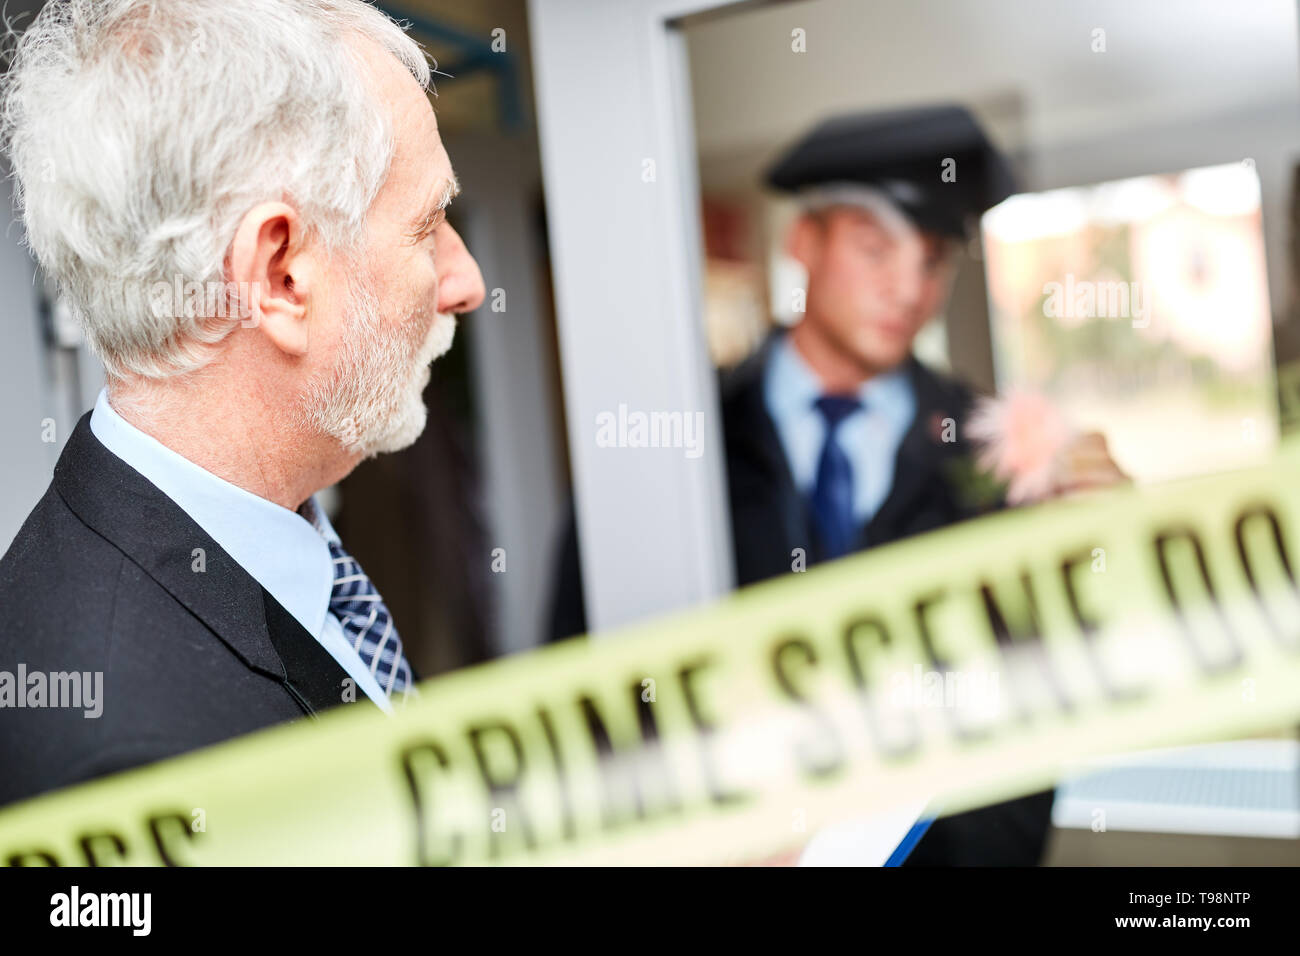 Police at forensics at the scene after a crime Stock Photo